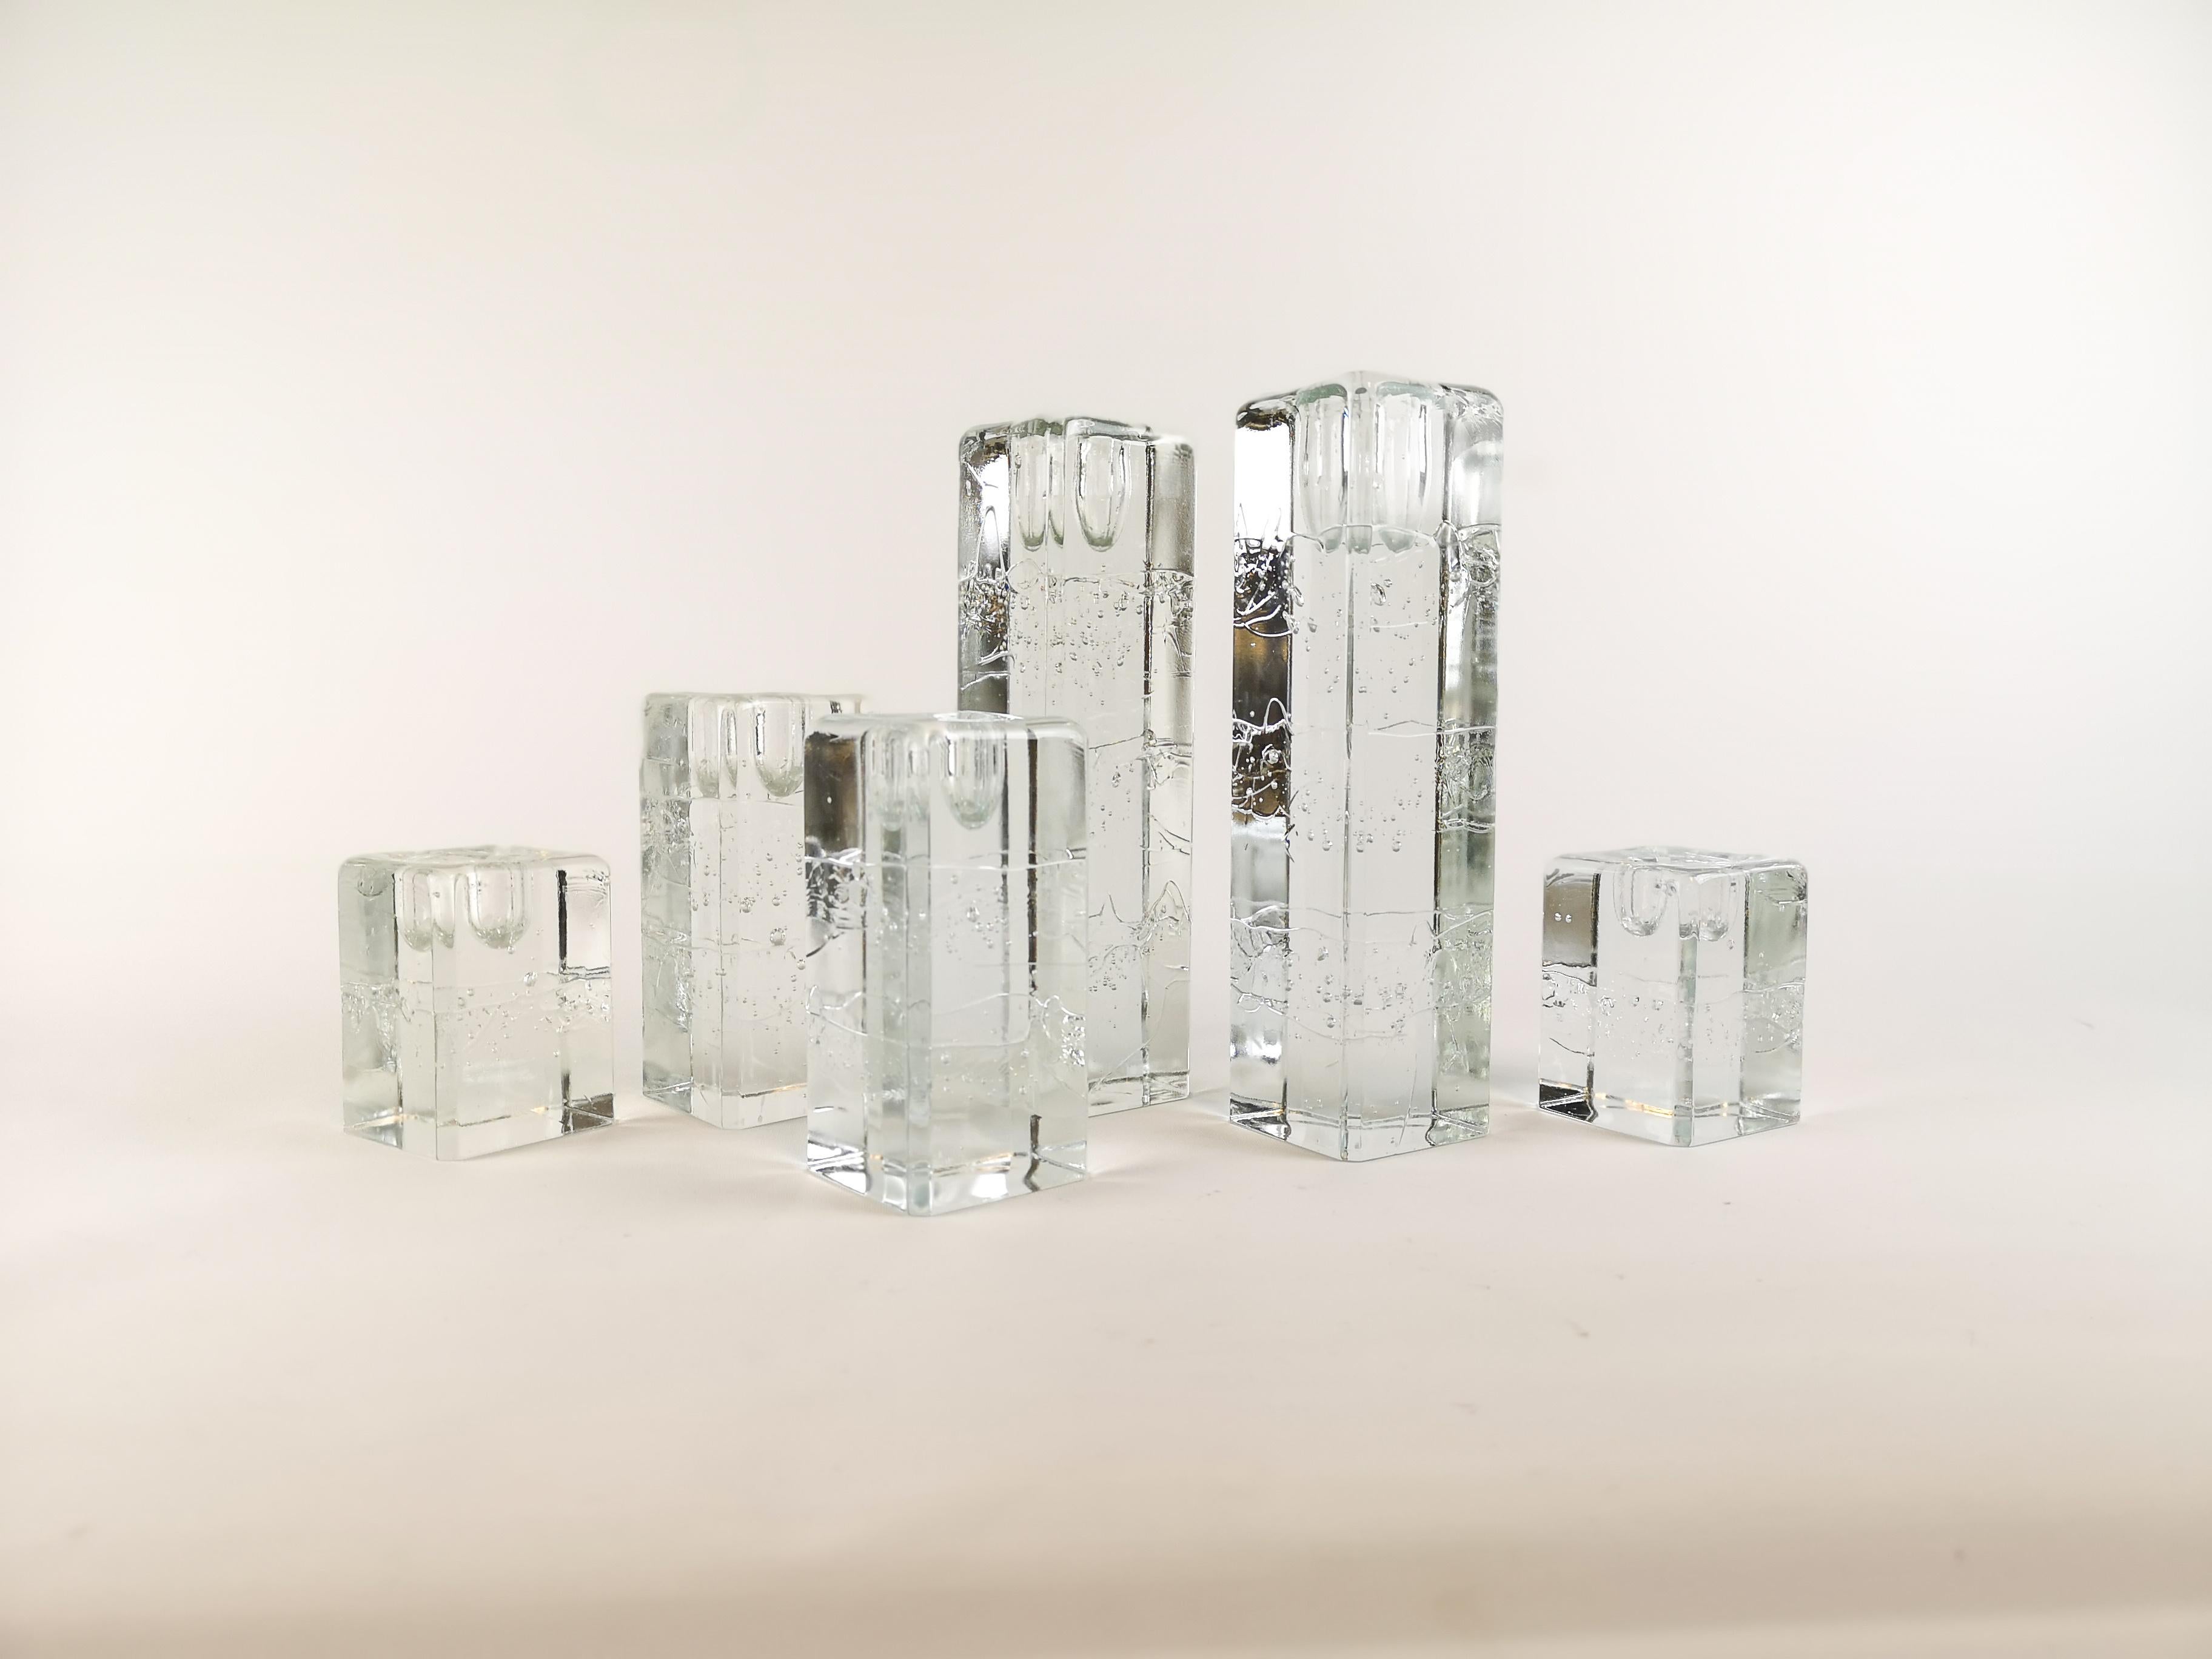 Group of 6 Iittala Arkipelago candlesticks in square high forms.
Architectural cast clear glass blocks.
With bubbles. They are created to appear as if they were is blocks. They are designed by Timo Sarpaneva in the 1970s for Iittala